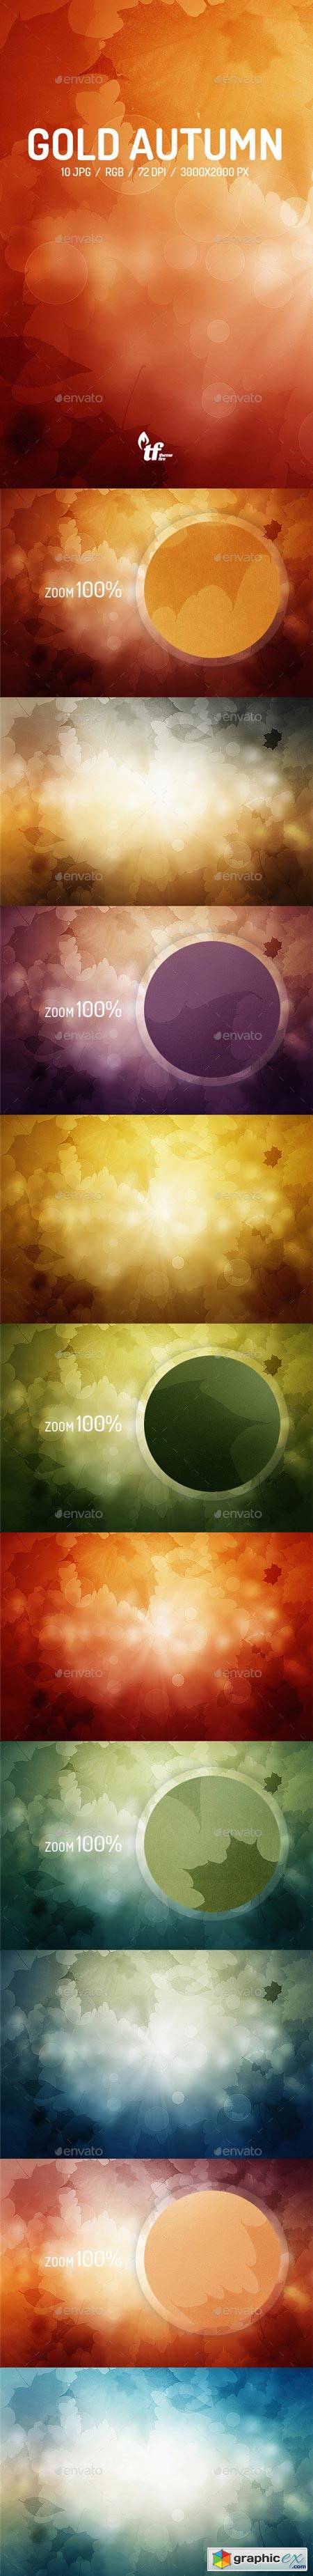 Gold Autumn Backgrounds 9091523